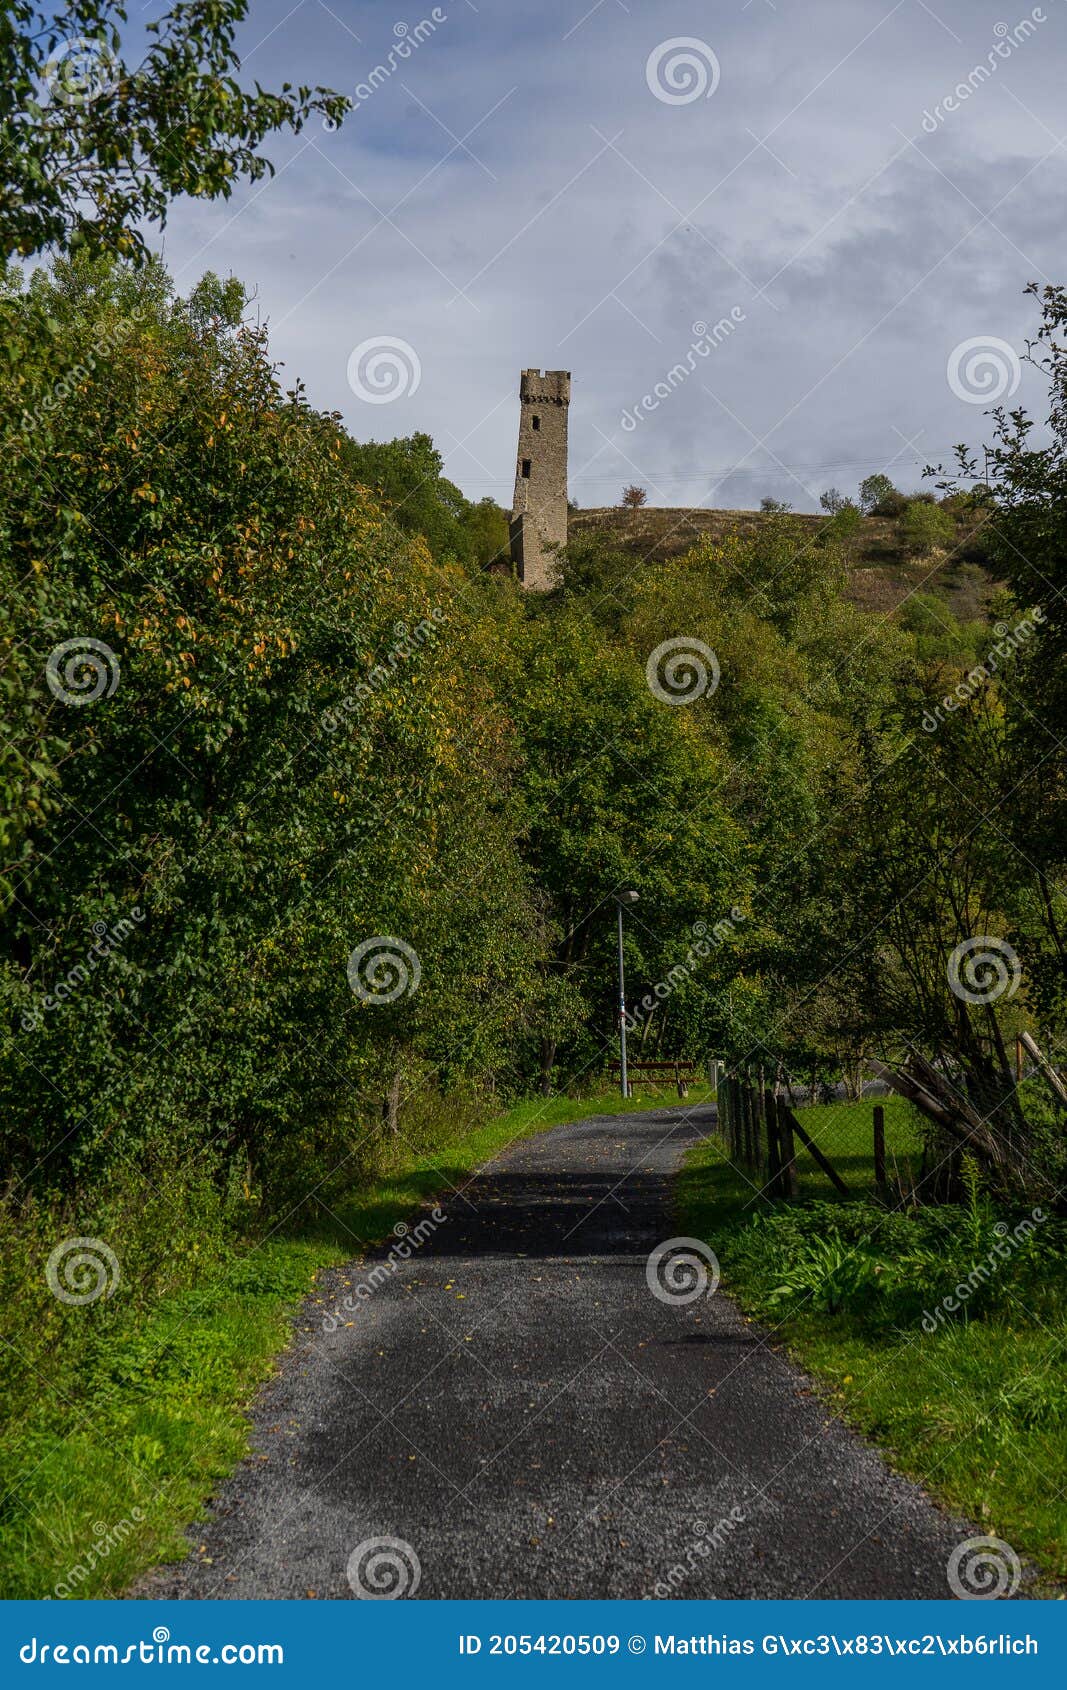 view to the ruin castle called philippsburg in the german region eifel